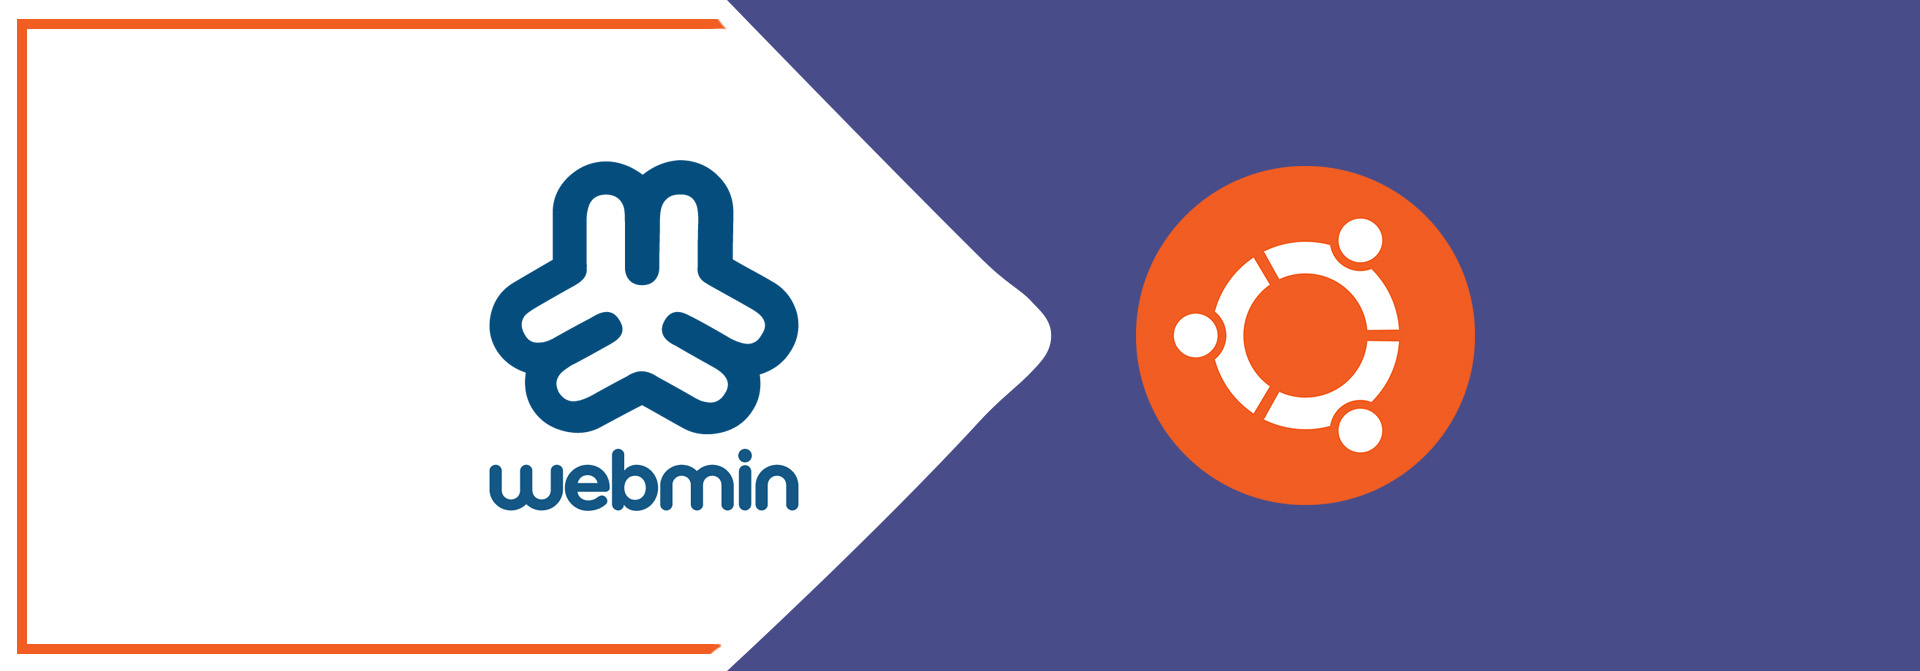 How To Install Webmin And Secure With Nginx On Ubuntu 20.04 LTS